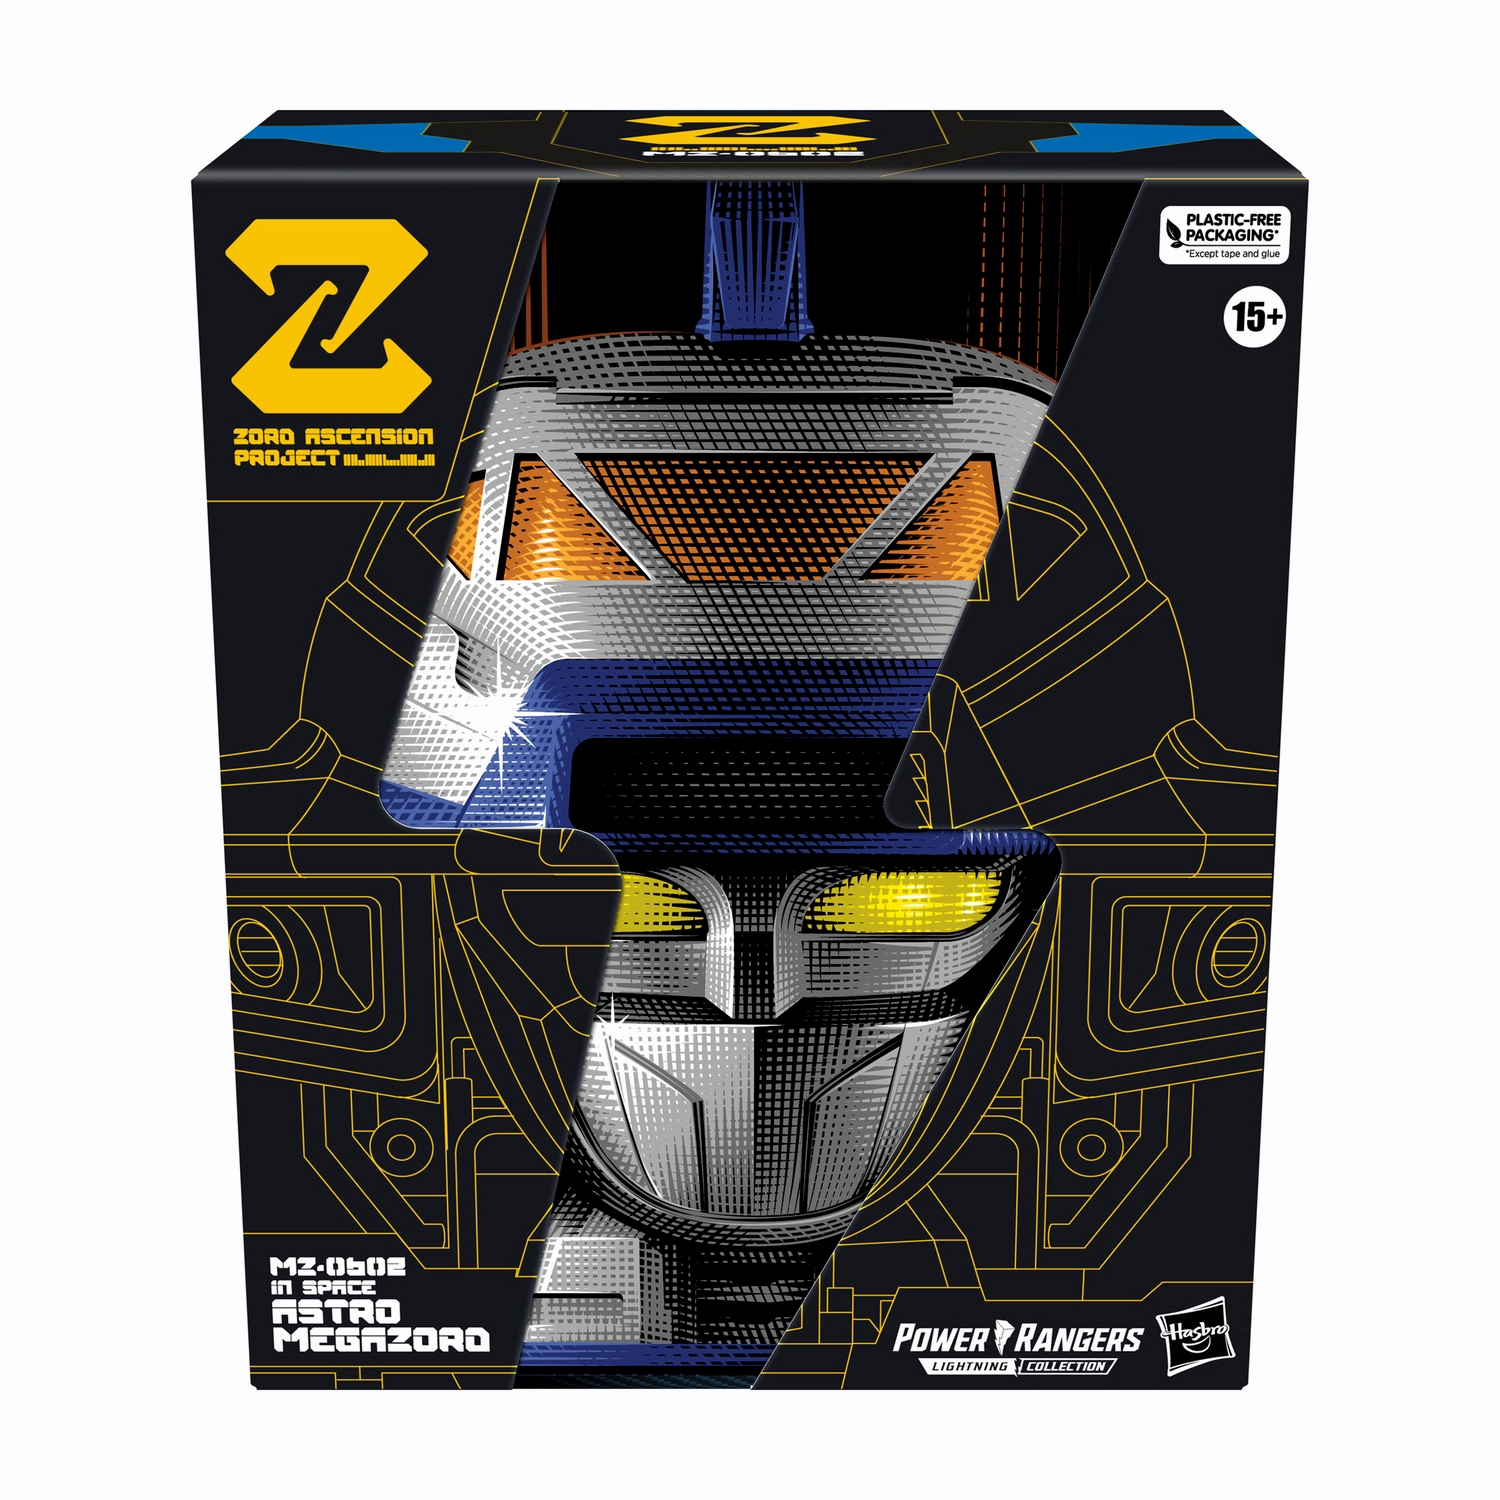 ZAP In Space Astro Megazord_Product Packaging.jpg